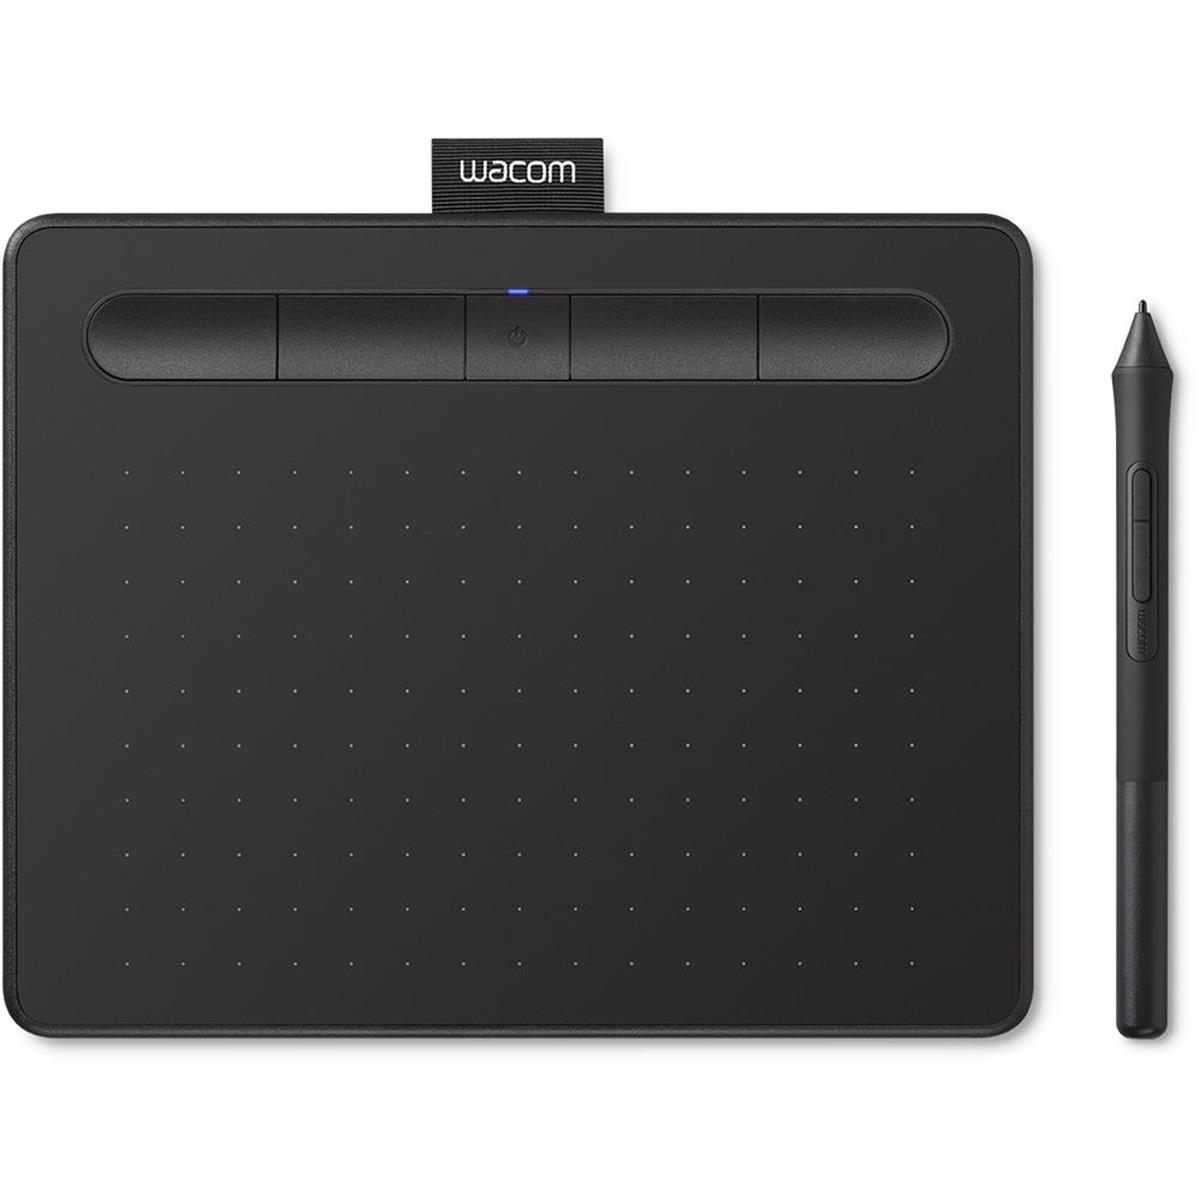 Wacom Intuos Wireless Graphics Drawing Tablet for $49.95 Shipped